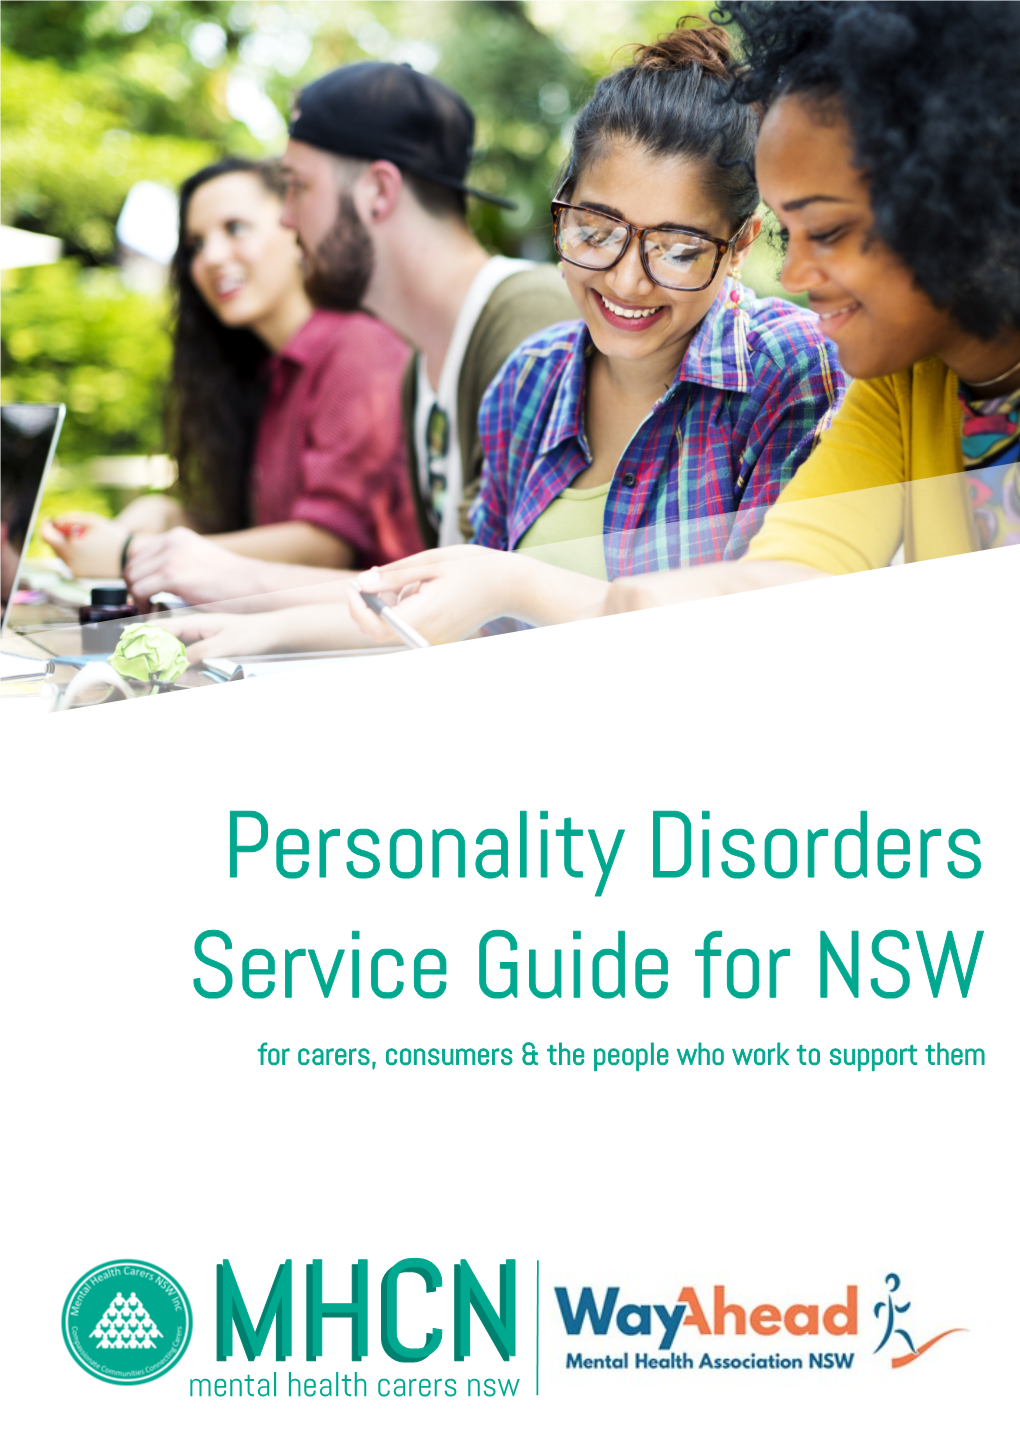 Personality Disorders Service Guide for NSW for Carers, Consumers & the People Who Work to Support Them